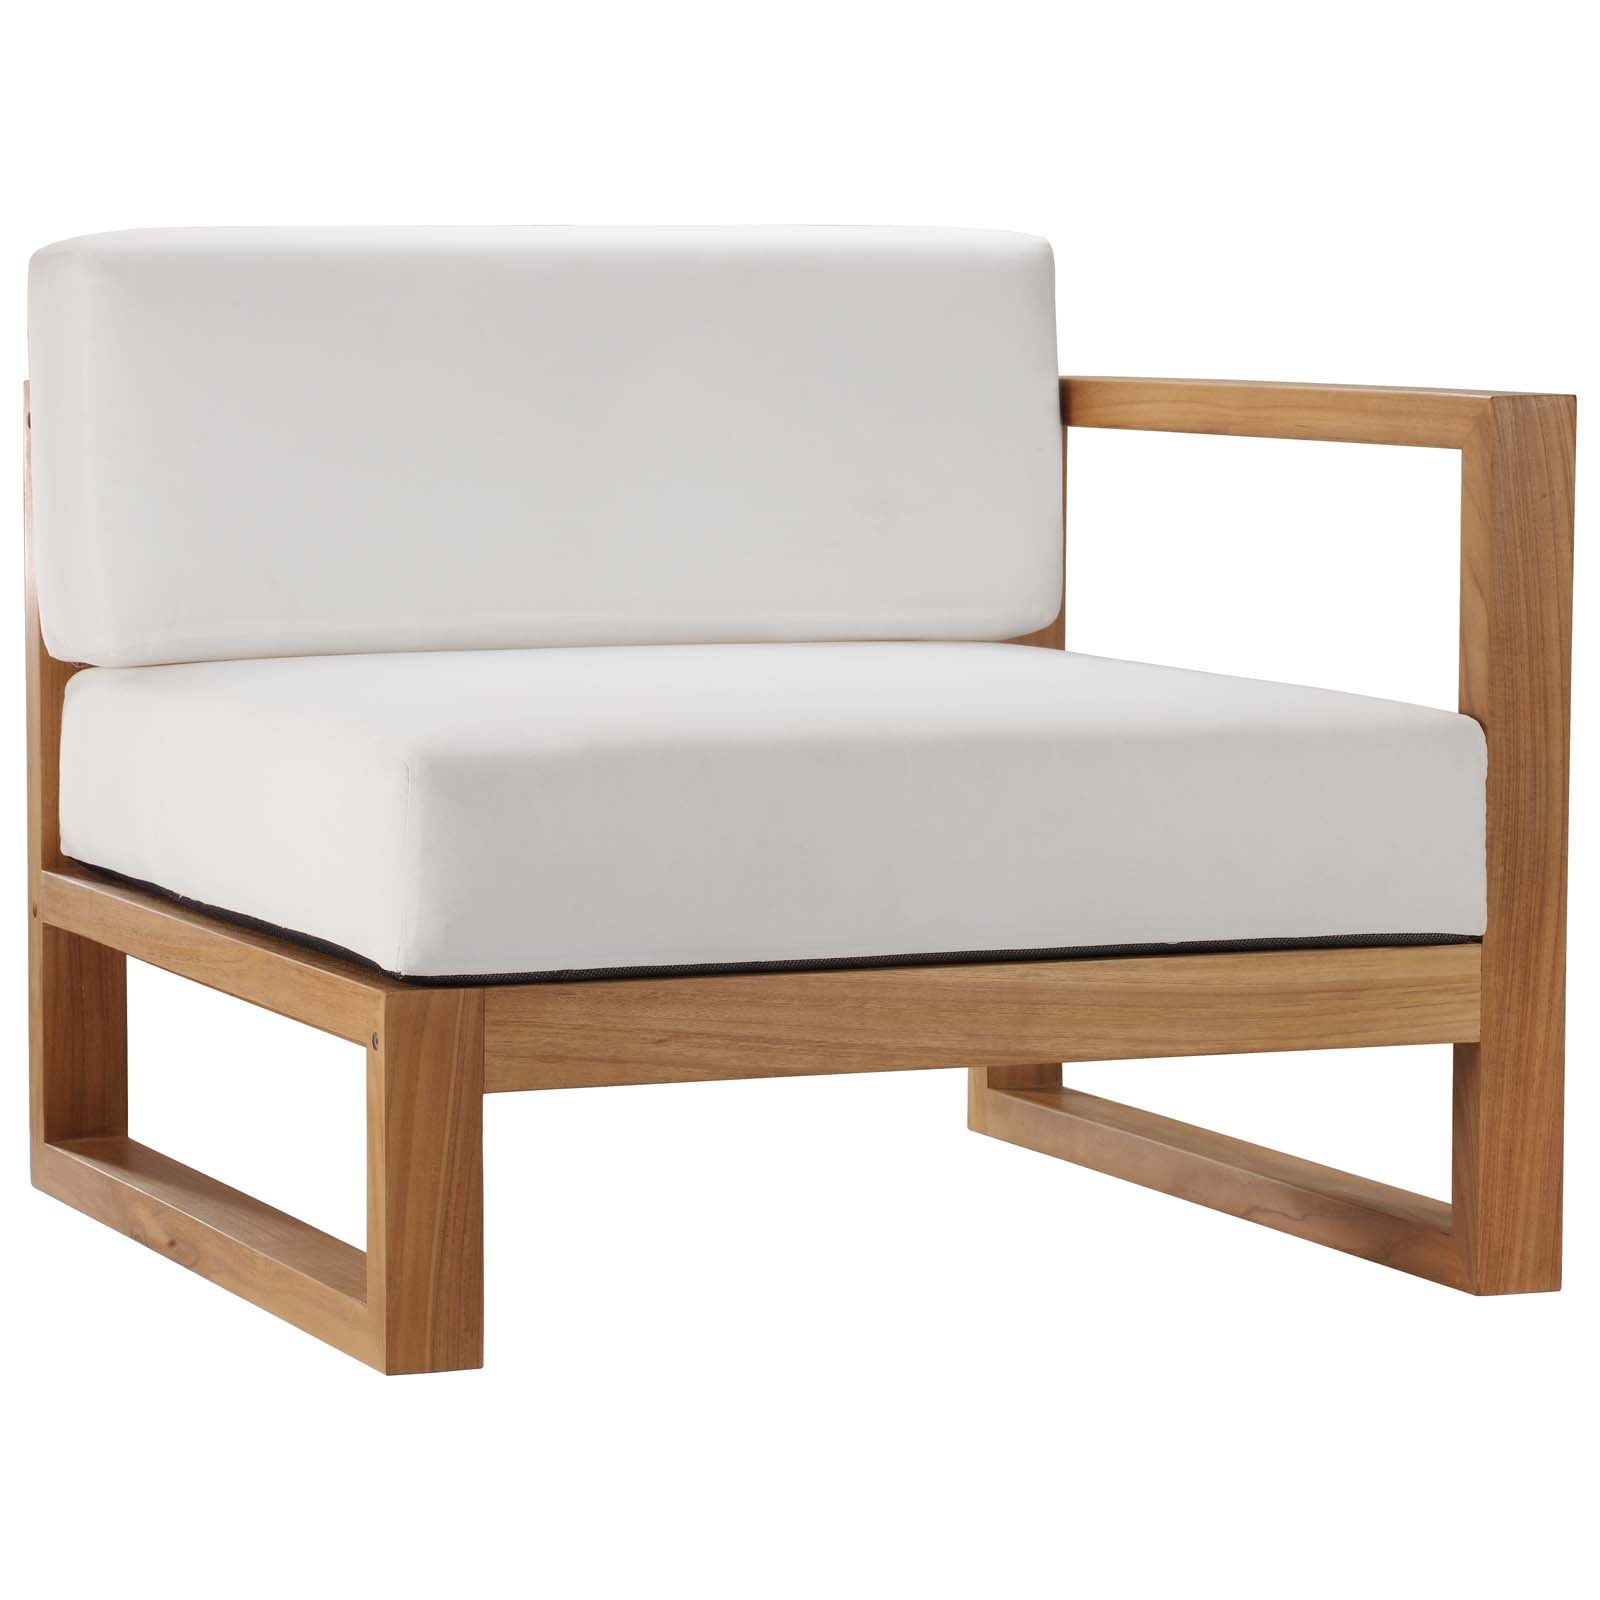 Modway Outdoor Chairs - Upland Outdoor Patio Teak Wood Right Arm Chair Natural White